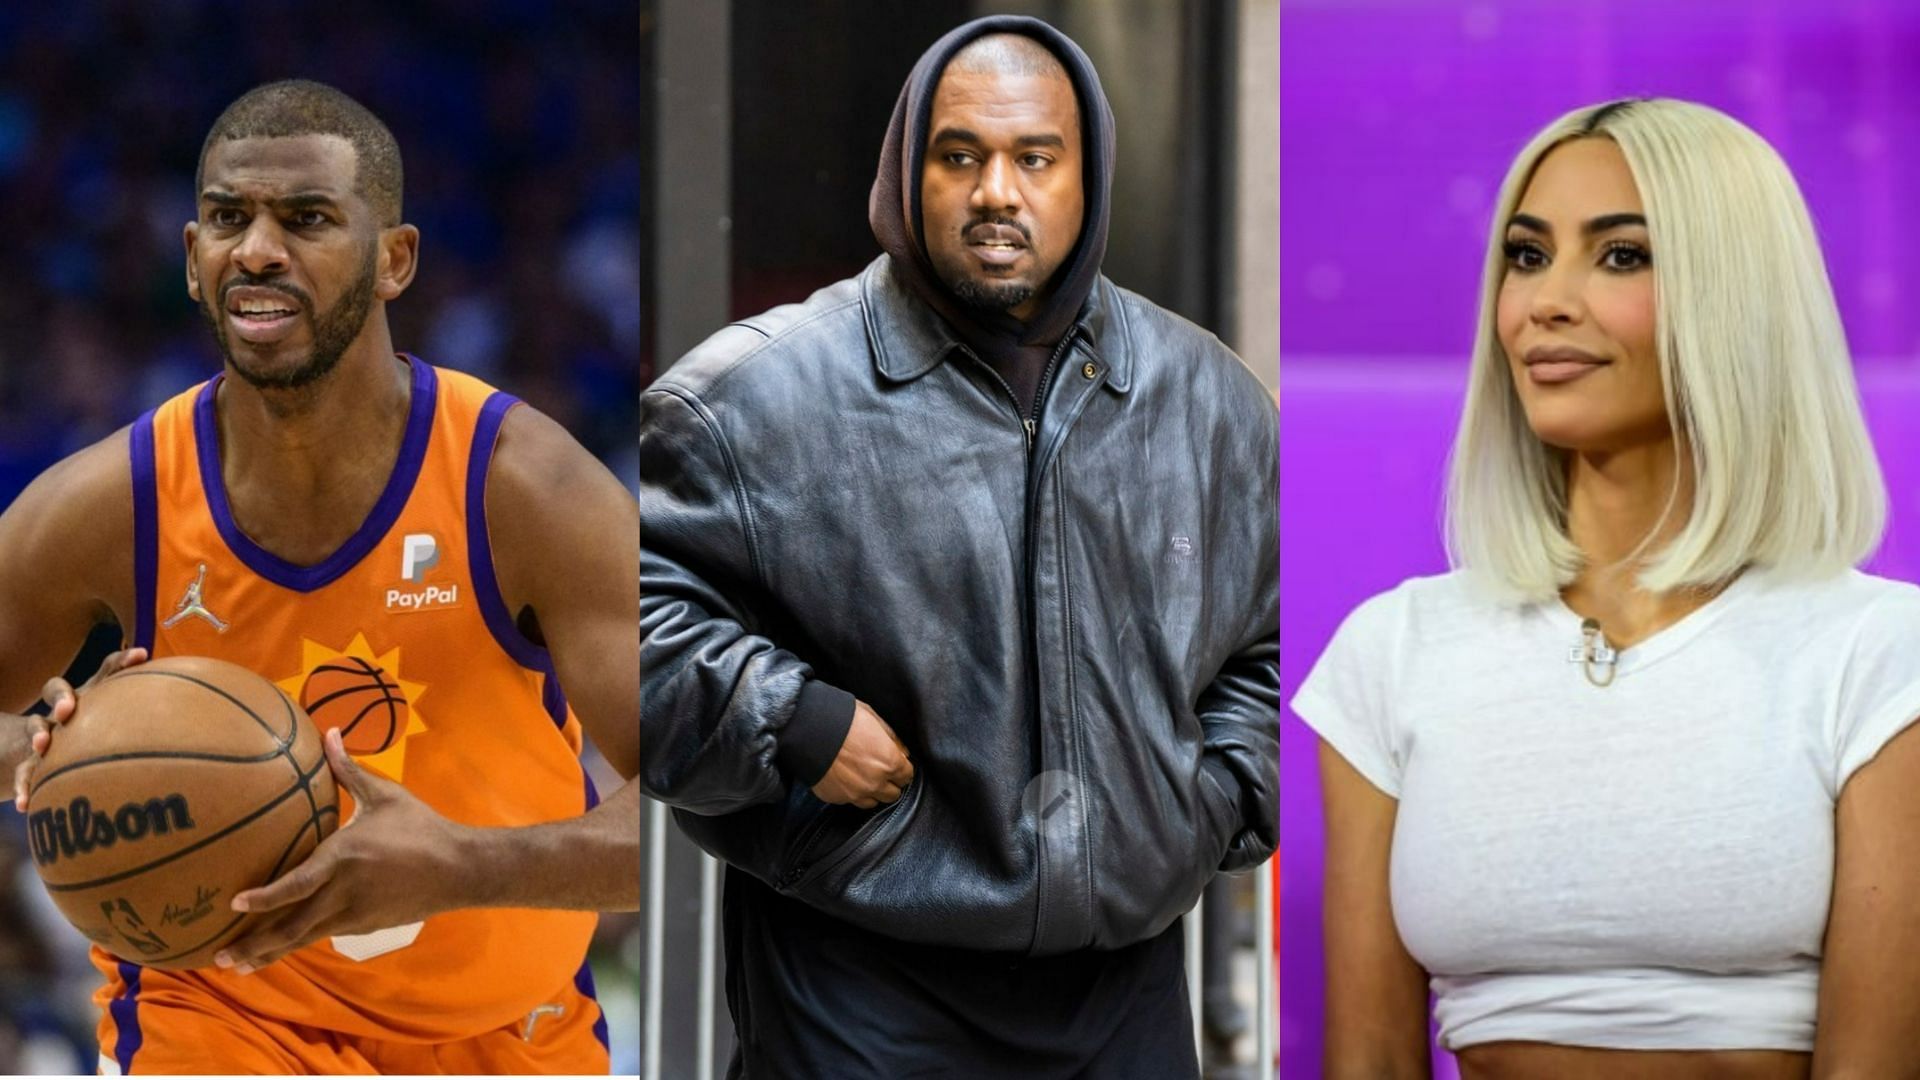 Kanye West claims he caught Chris Paul and Kim Kardashian together (Image via Getty Images and NBC)